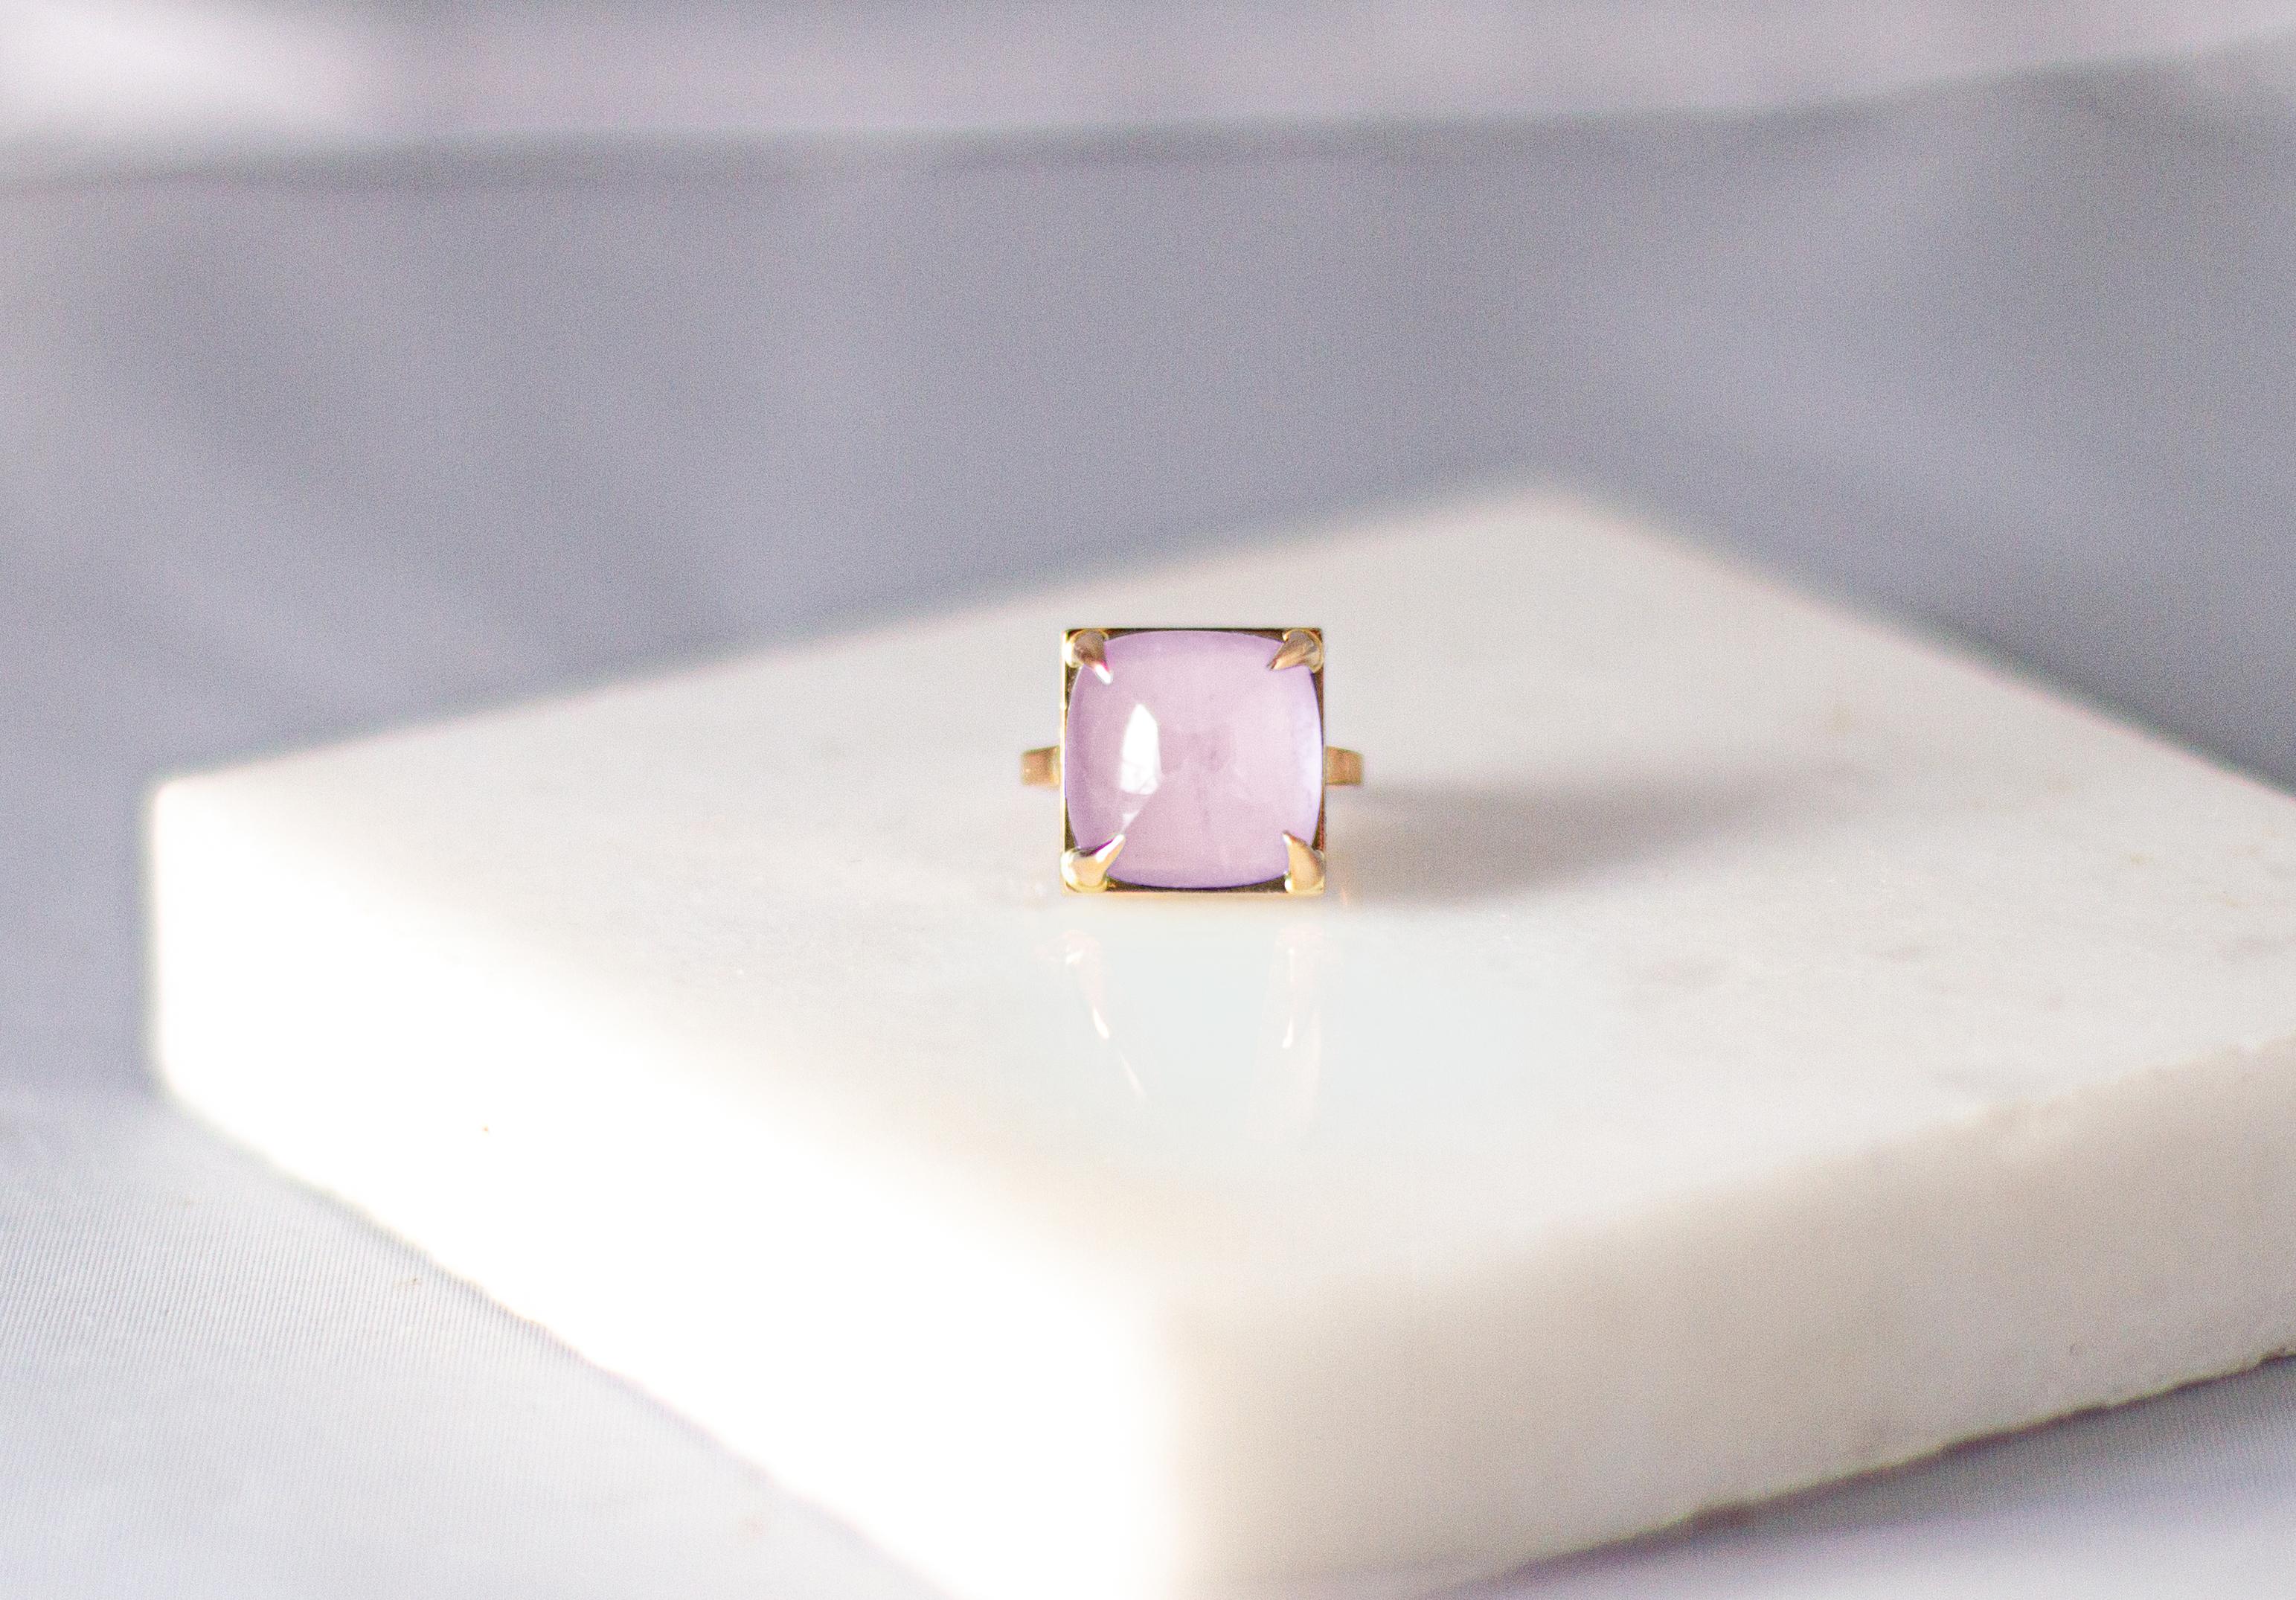 This Engagement ring is made of 18 karat white gold with sugarloaf cut natural light pink quartz. 

When for most of the gem it works the way: the smaller prongs the better. This is the shape and size of the gem that we really enjoy to see avoiding